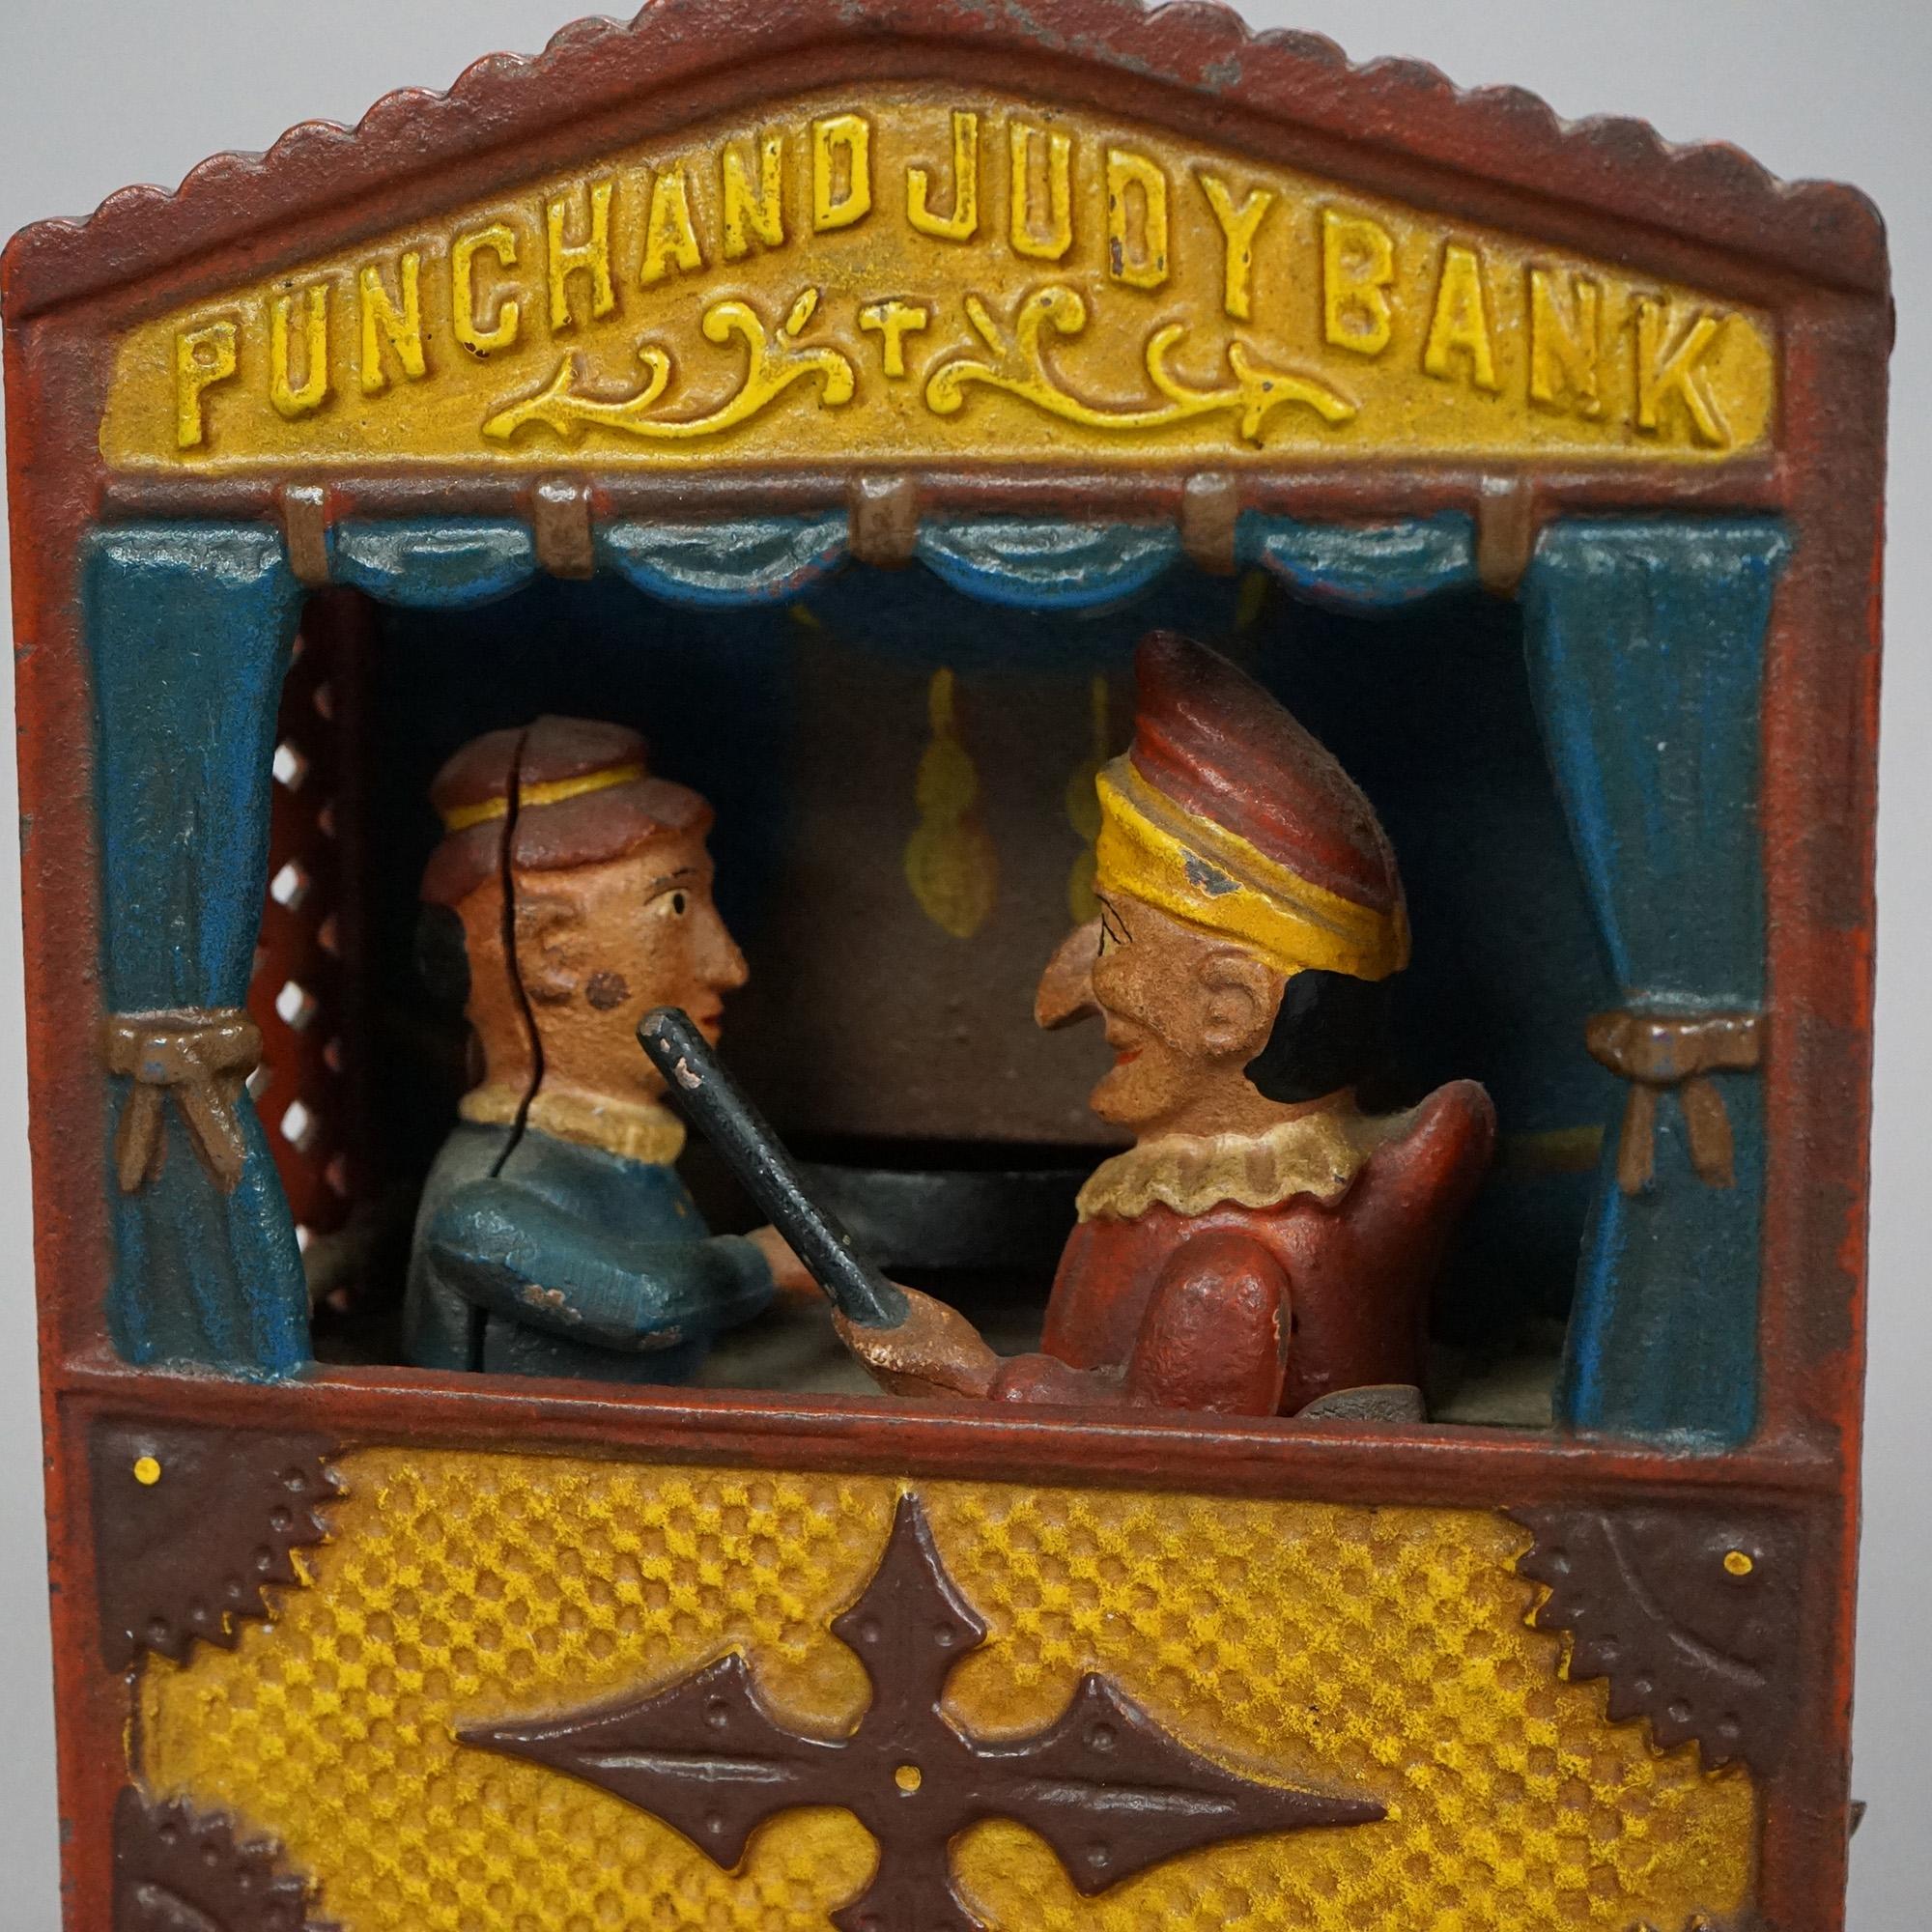 American Vintage Cast Iron Book of Knowledge Mechanical Bank, Punch & Judy, 20th Century